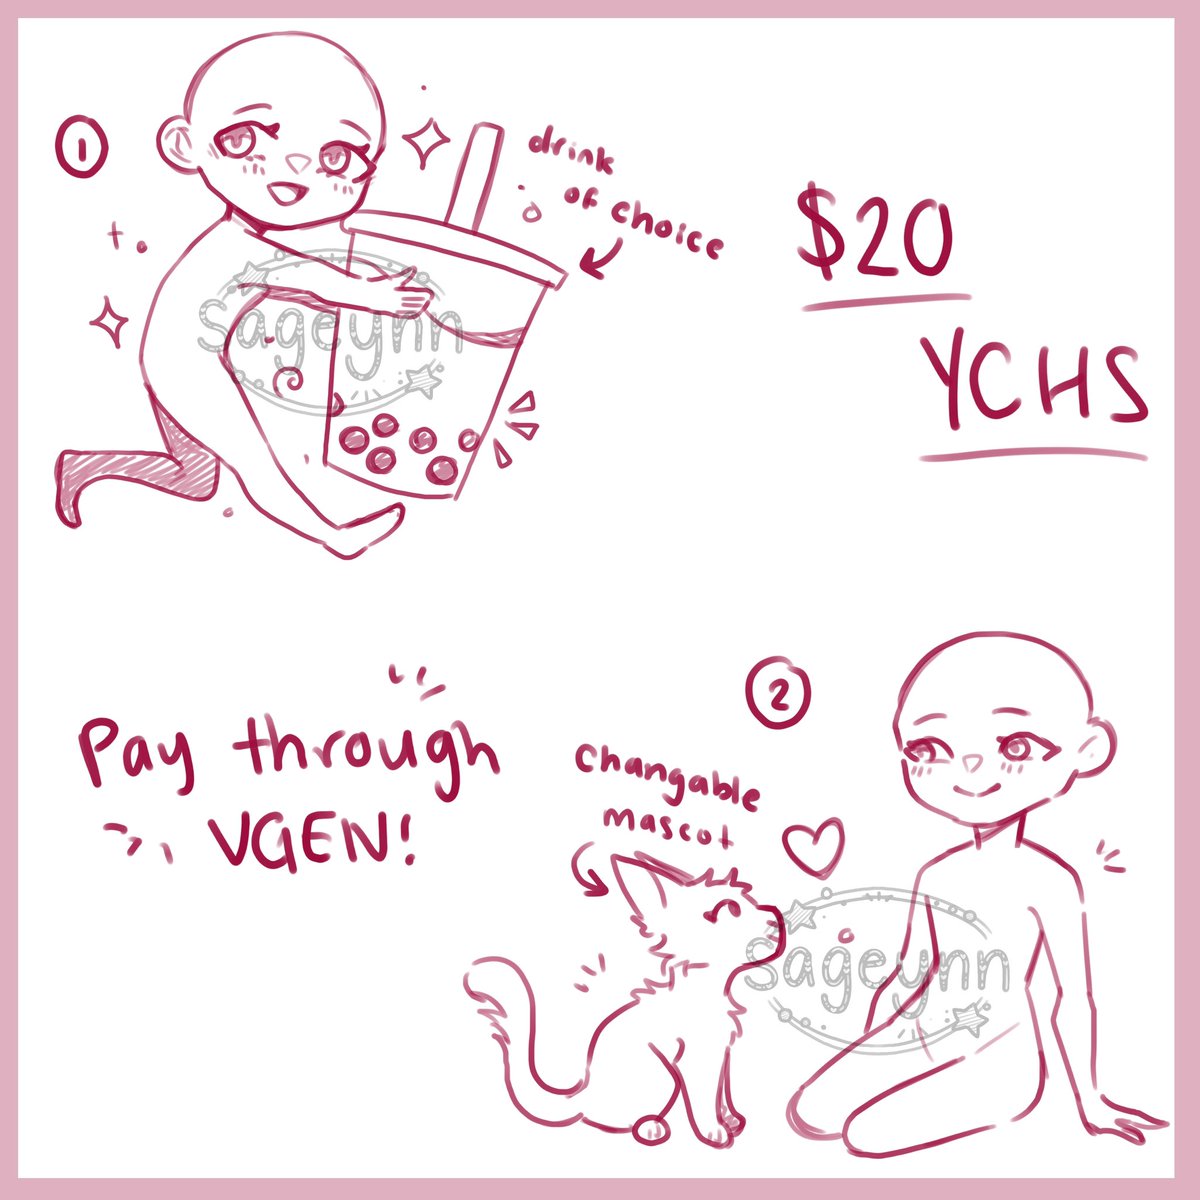 If anyone’s interested I’m now offering these YCHs fully rendered for $20 on my vgen! The drink and animal are changeable!

vgen.co/Sageynn/servic…

#DigitalArtist #commisionsopen #VGenOpen